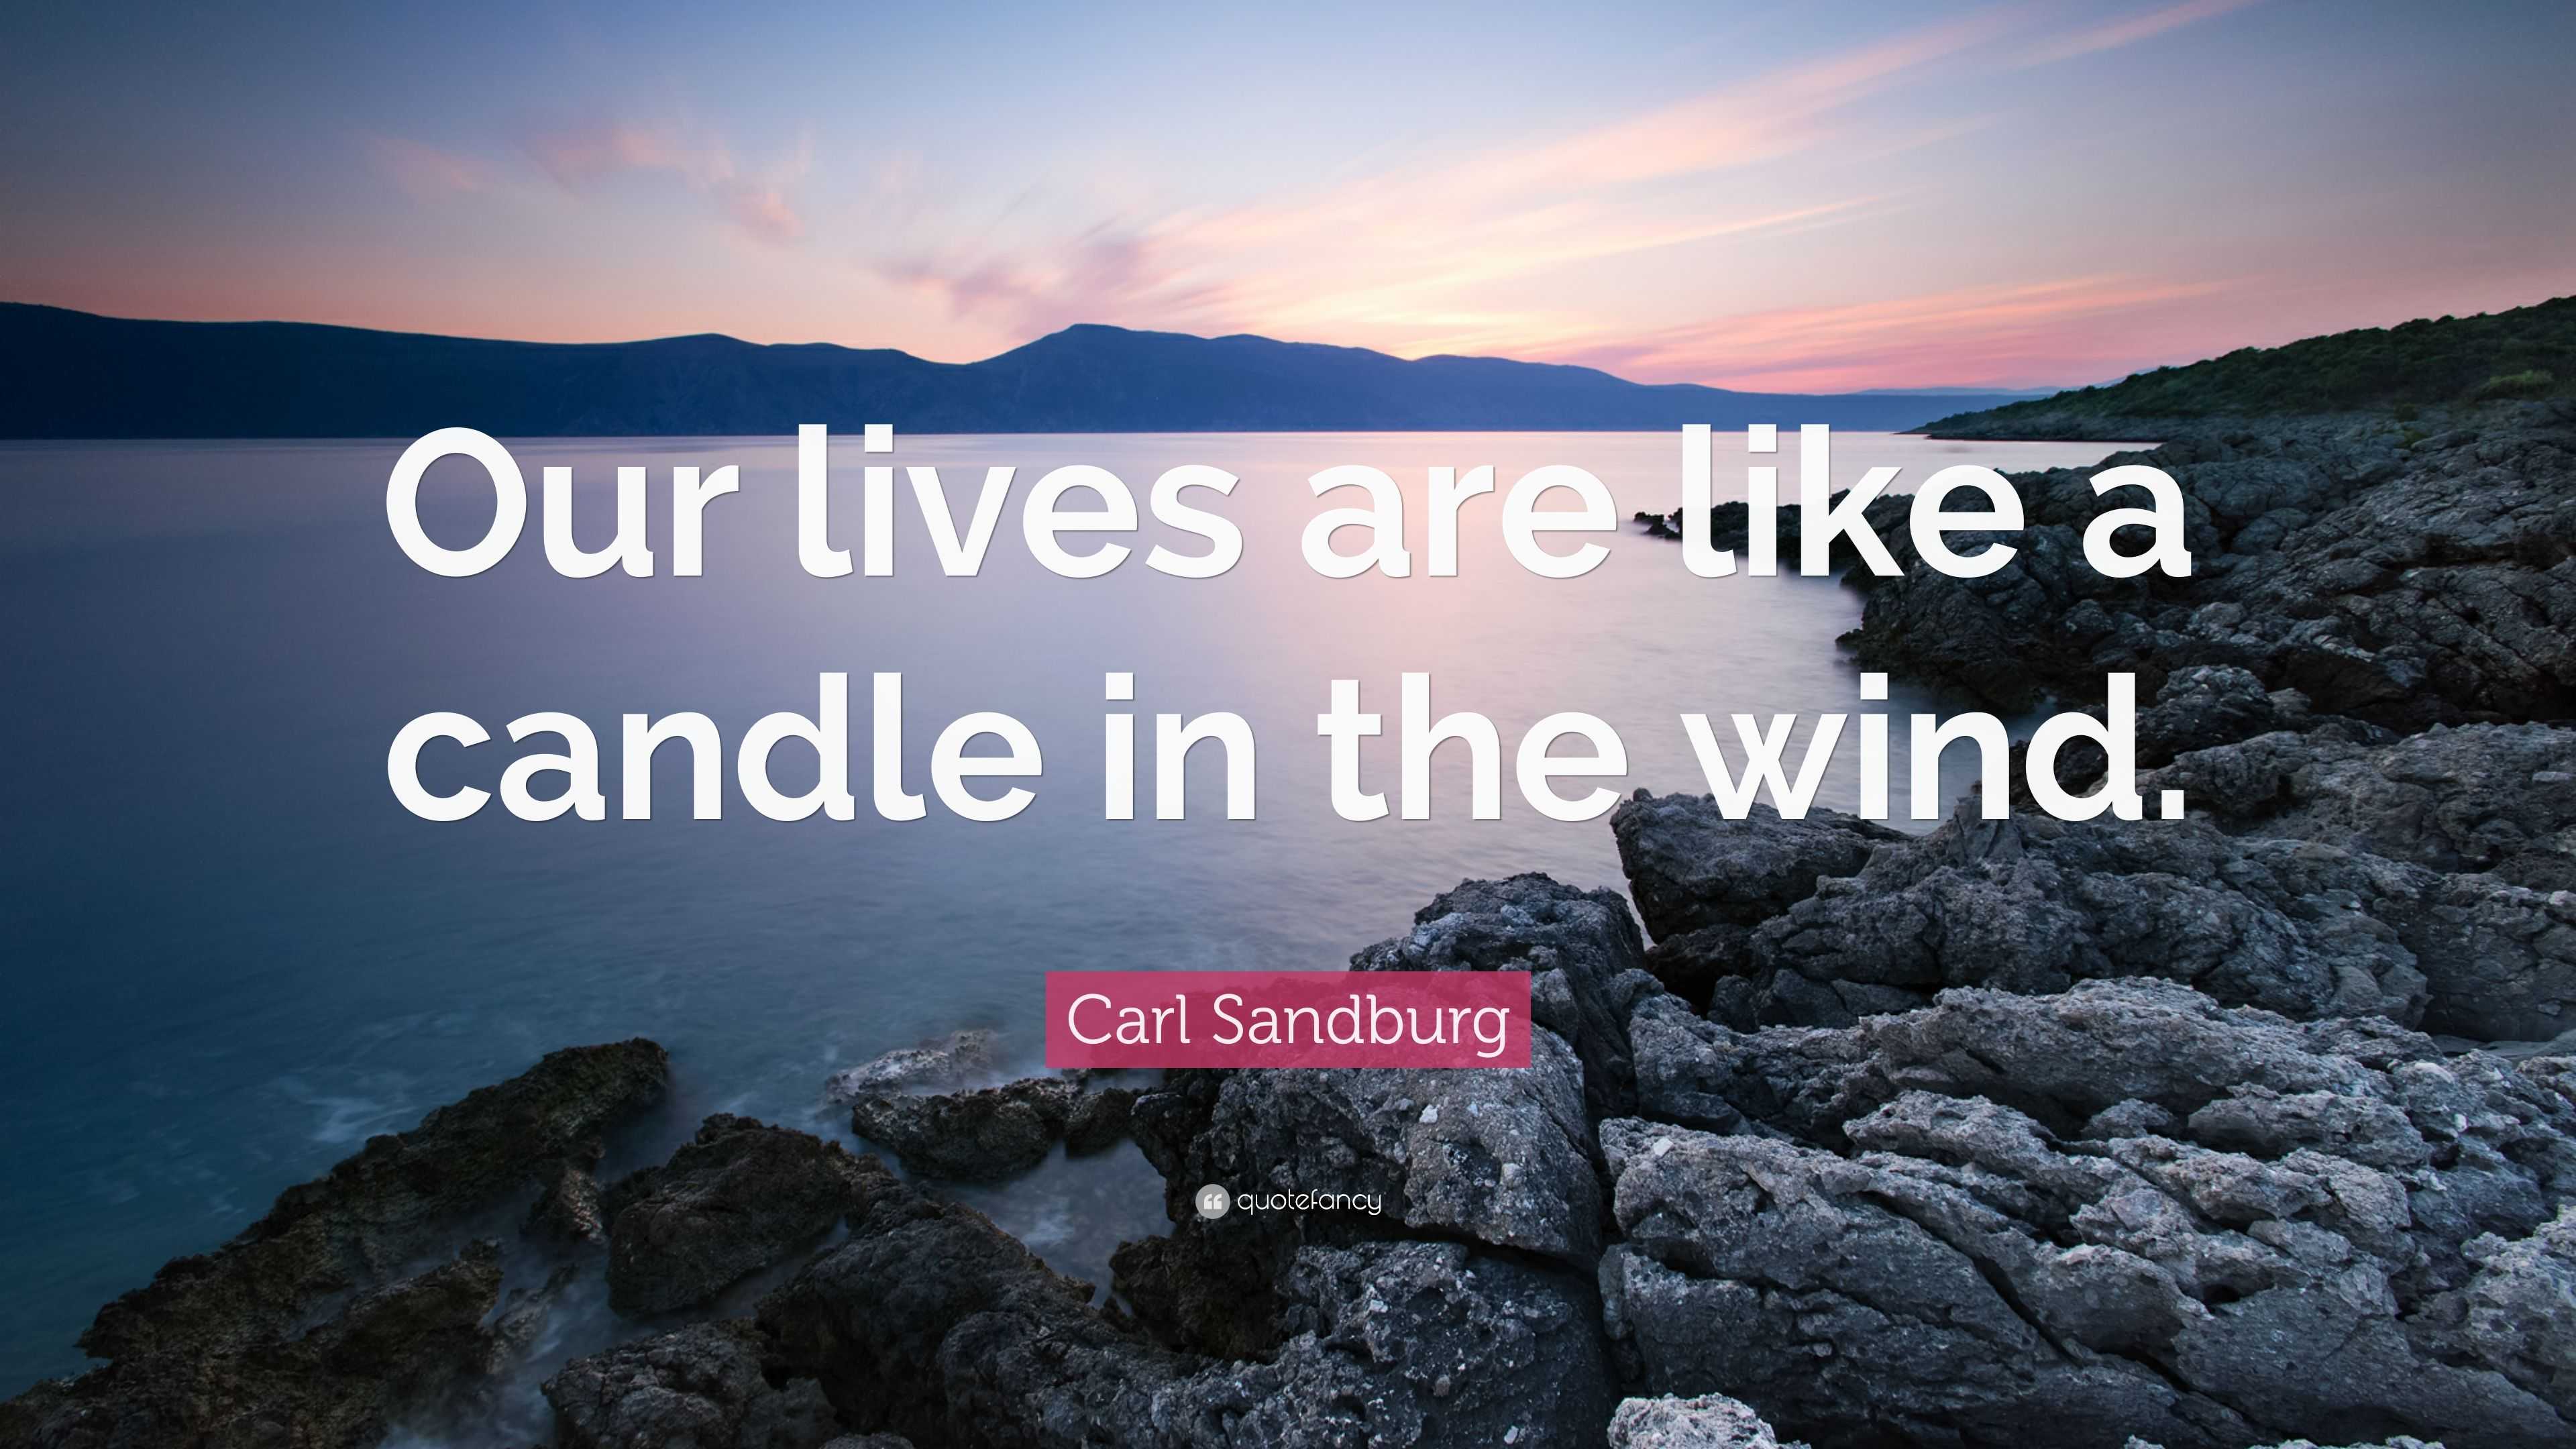 Carl Sandburg Quote: “Our lives are like a candle in the wind.”